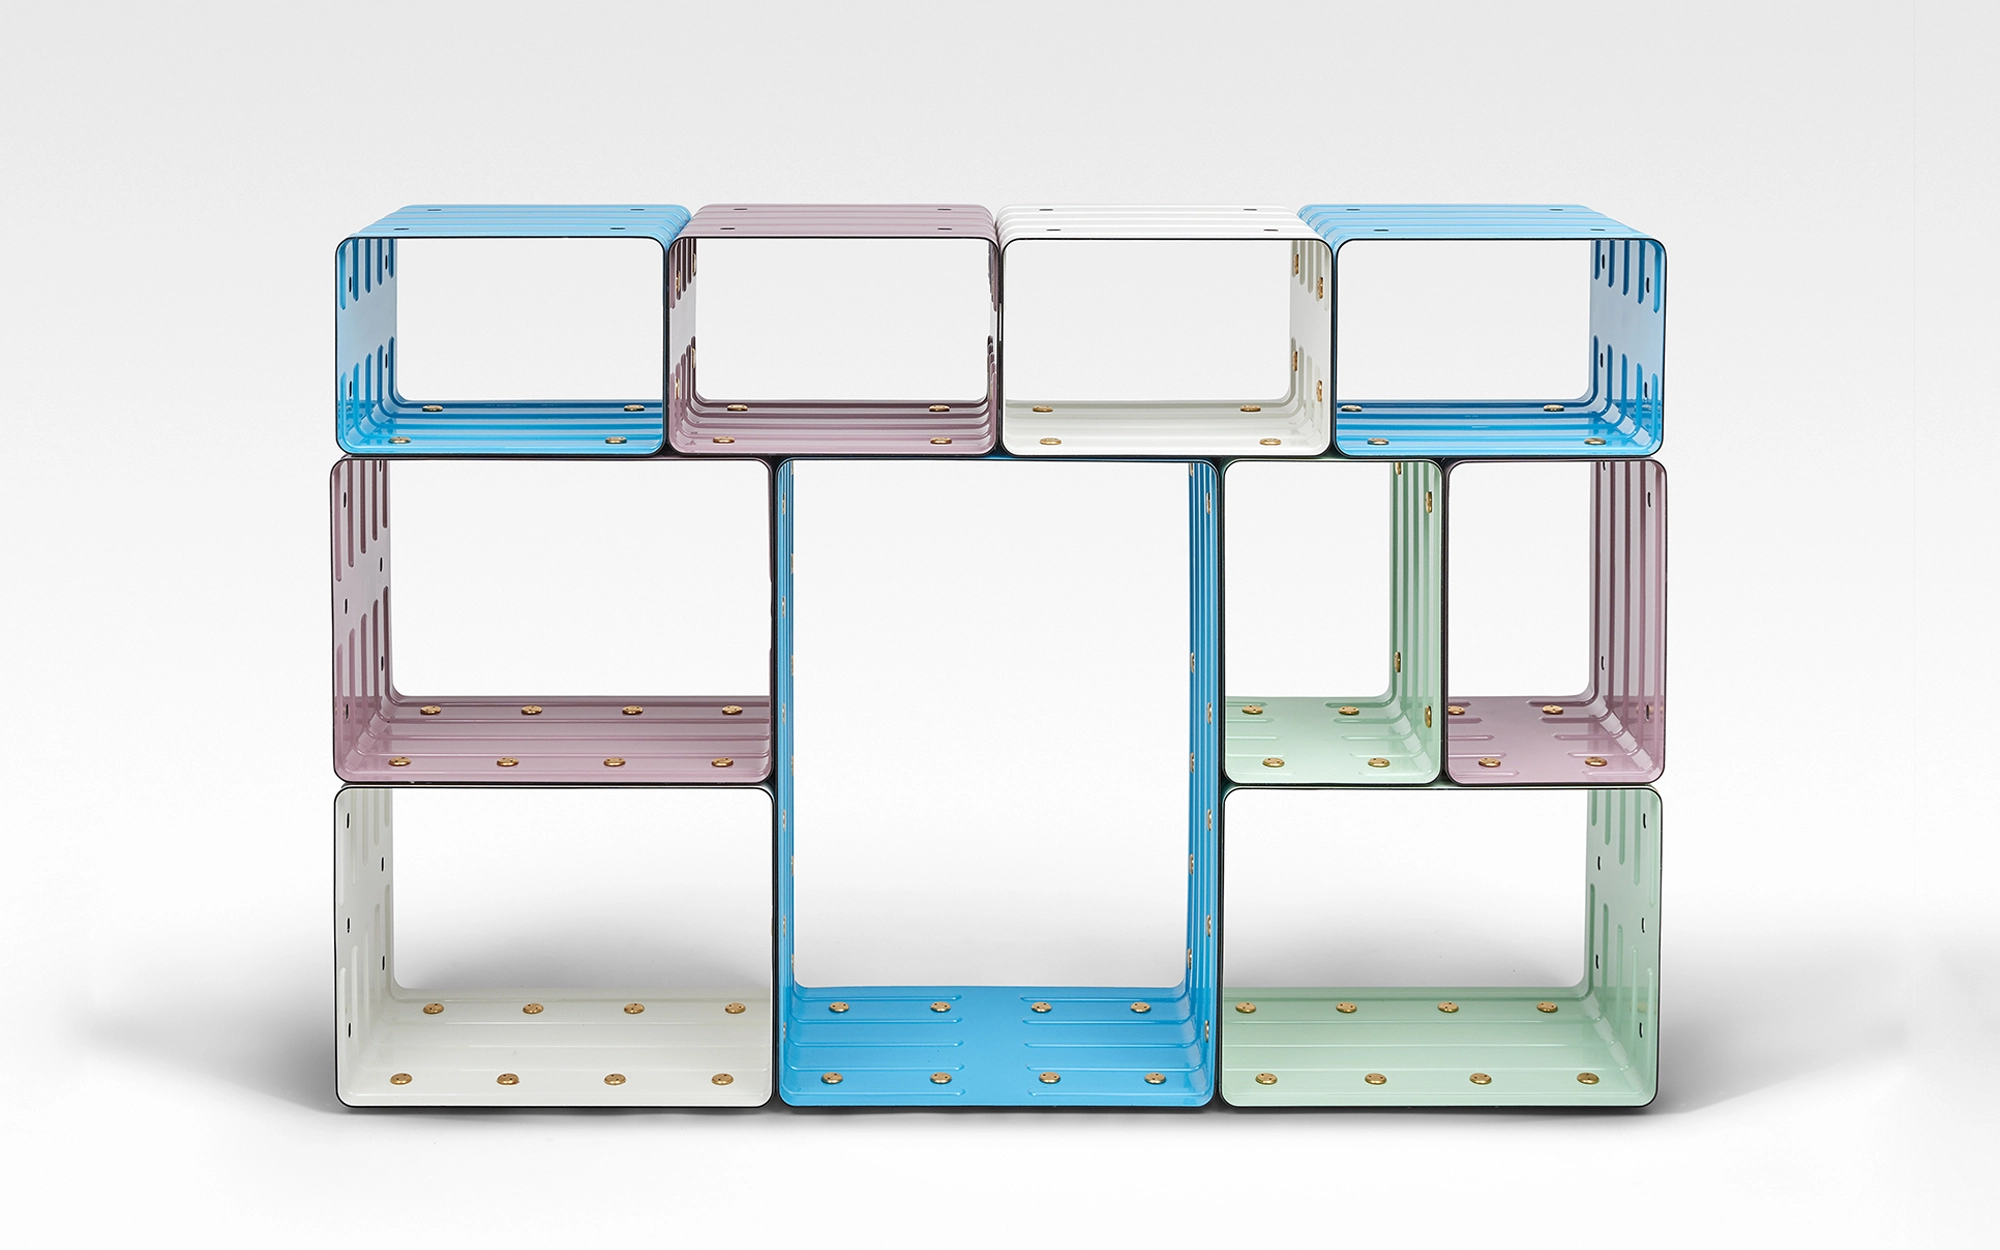 Quobus 1,3,6 multicolored - Marc Newson - Chair - Galerie kreo